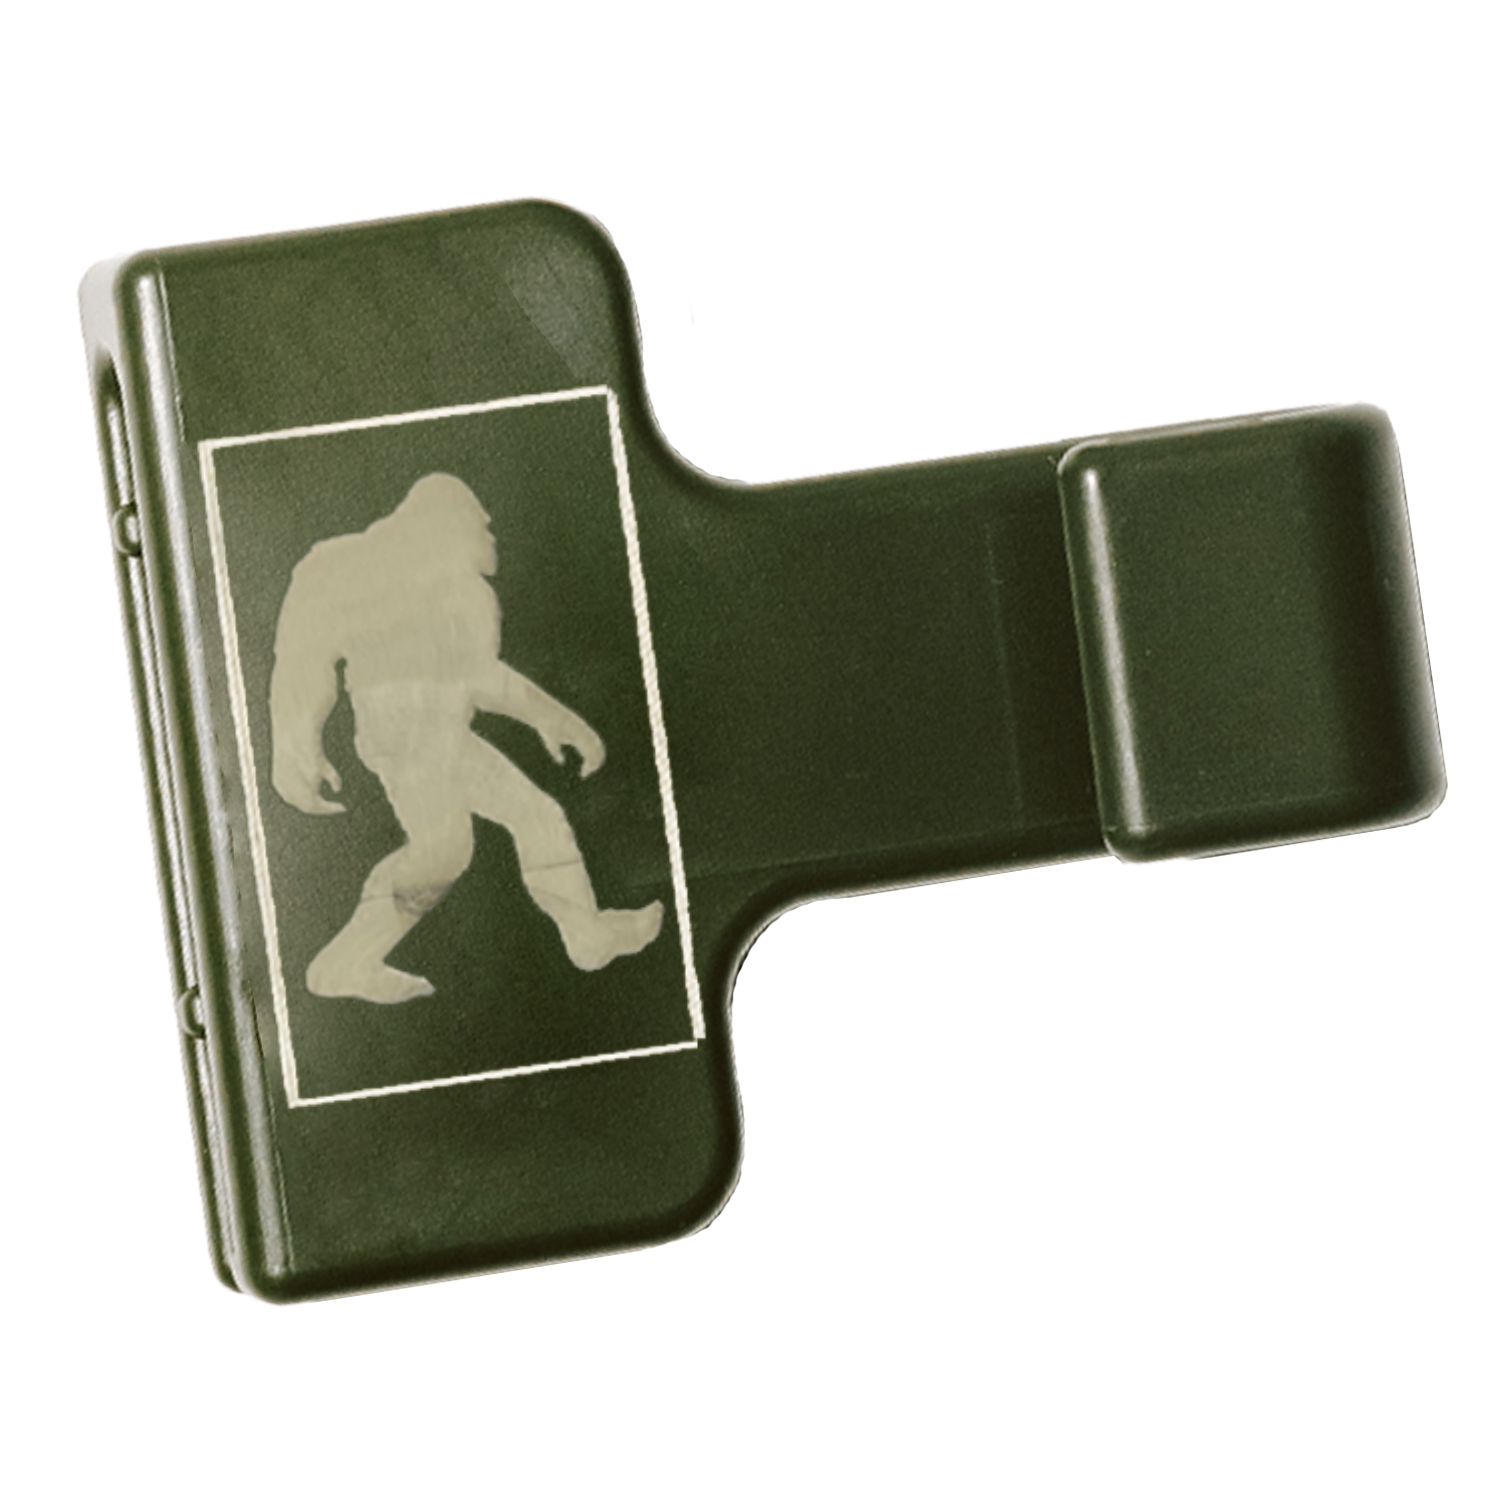 SPECIAL EDITION - Squatch CarryKeeper